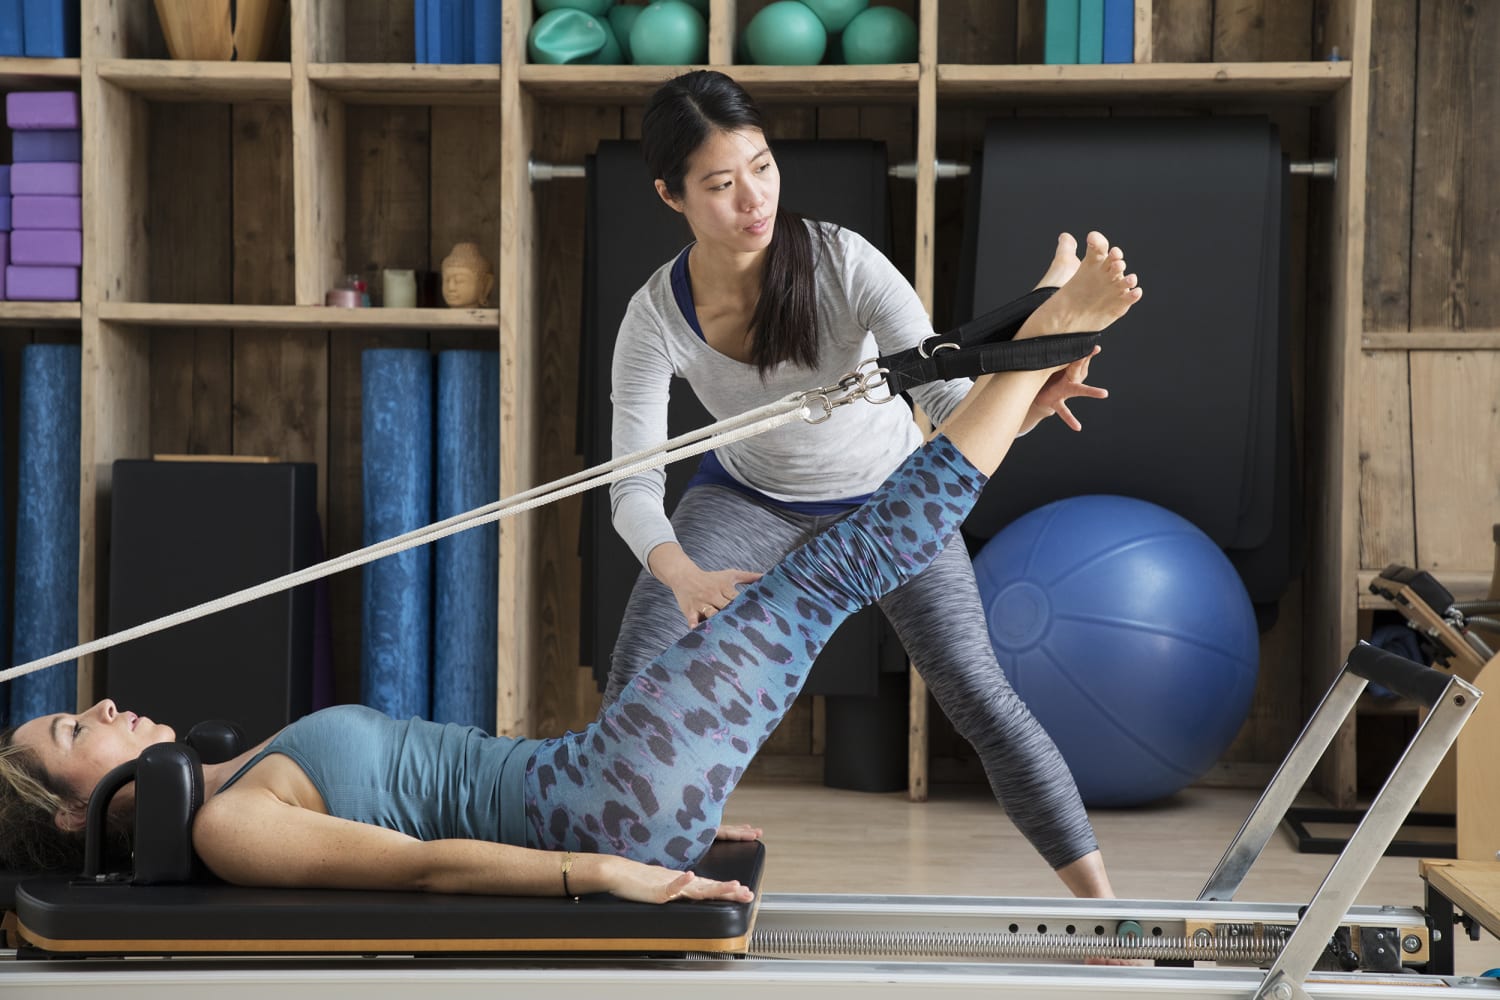 HOW DO I FIND THE BEST PILATES NEAR ME?